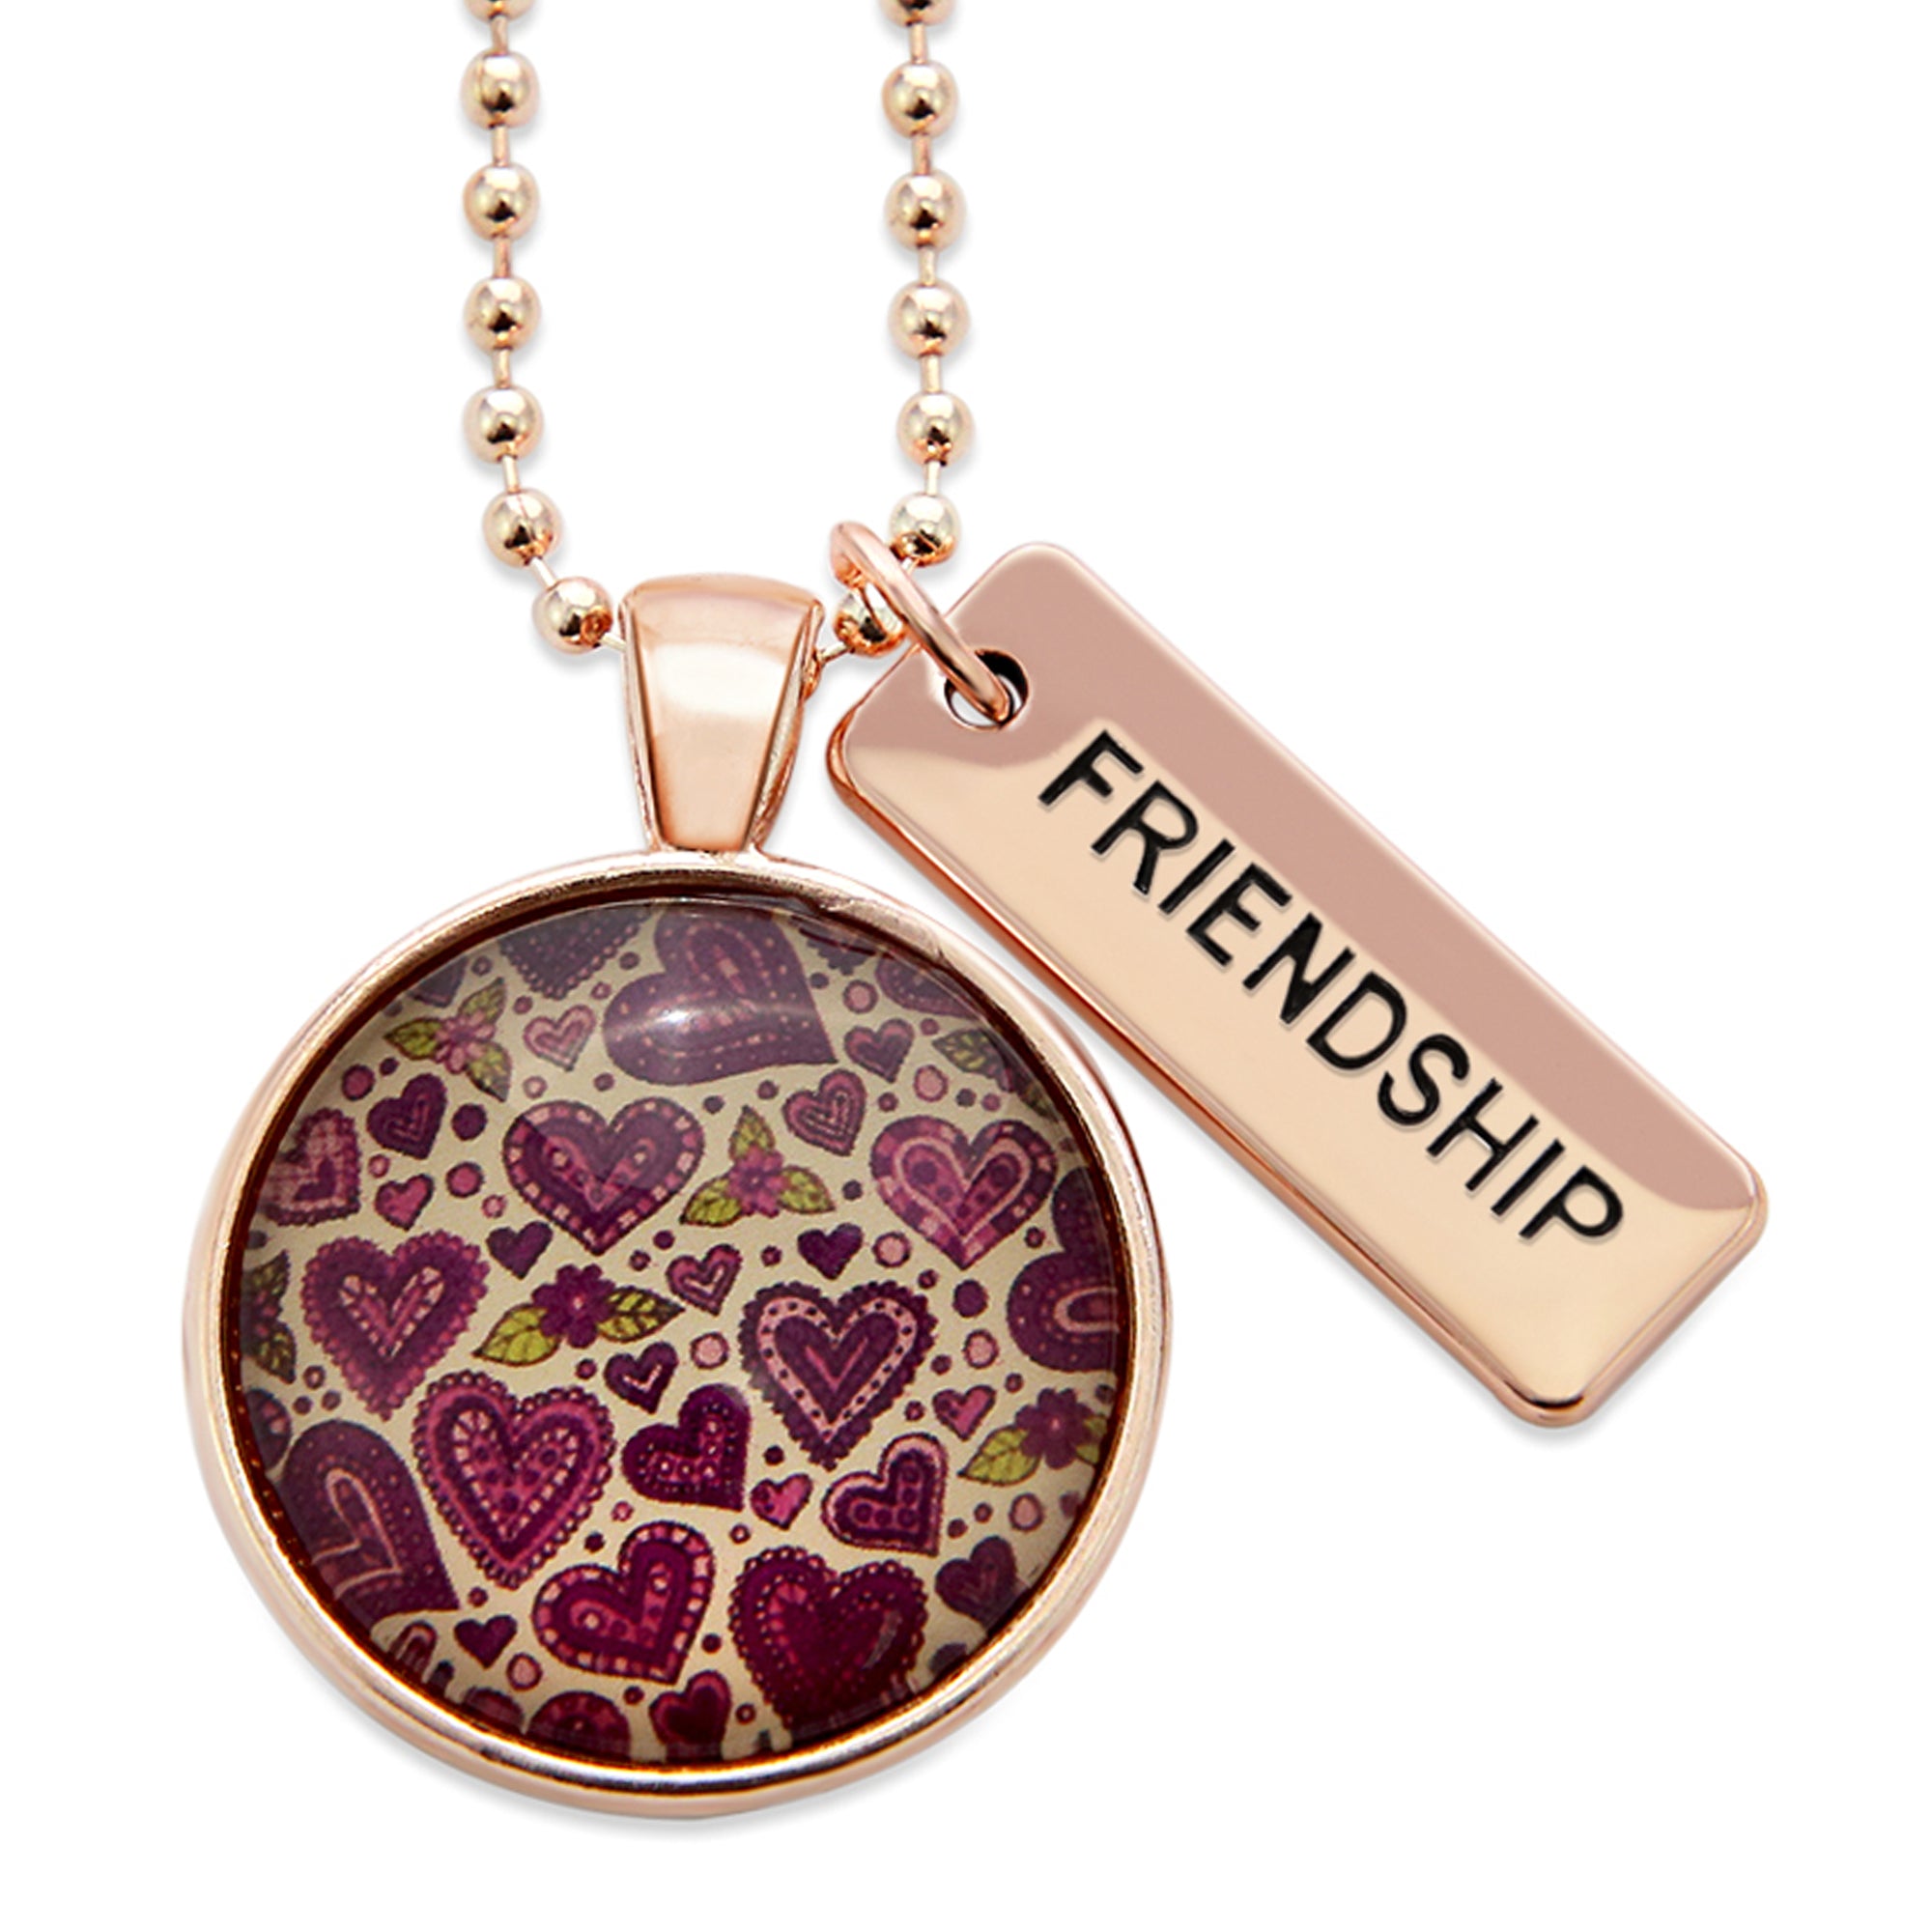 Heart & Soul Collection - Rose Gold 'FRIENDSHIP' Necklace - Heart Patch (10425)